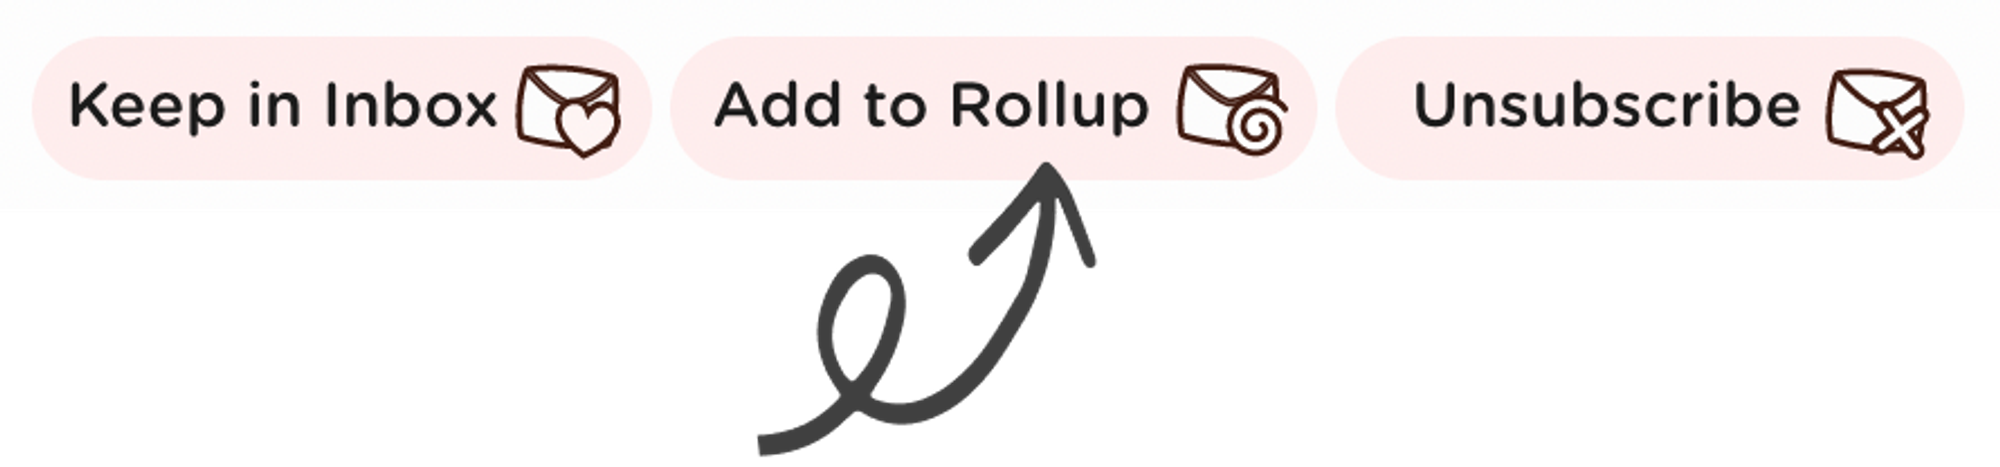 Click Add to Rollup to add an email to your Rollup!